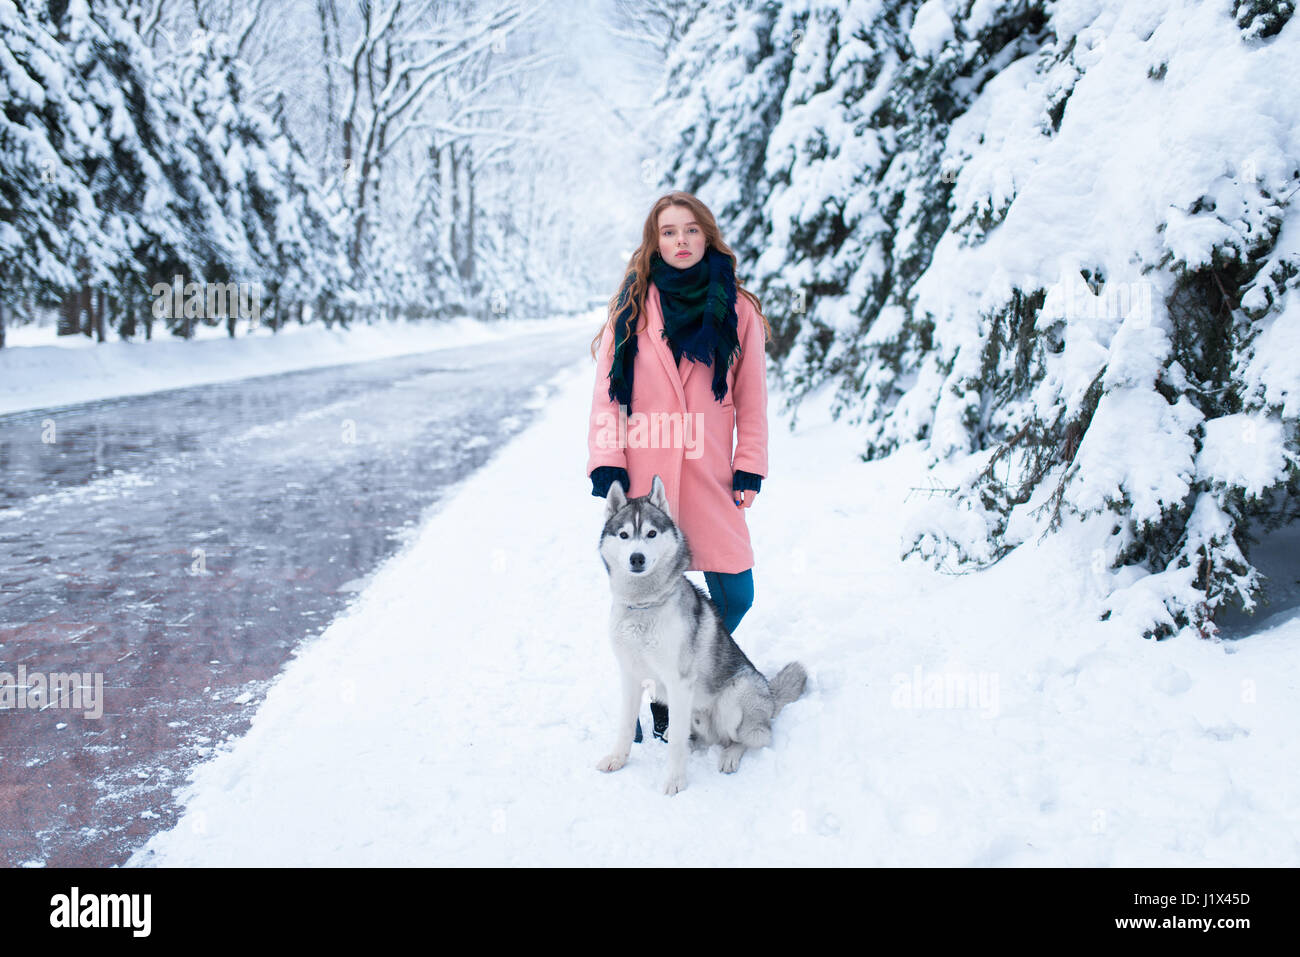 Siberian husky sitting near young woman, snowy forest on background. Cute girl with charming dog Stock Photo